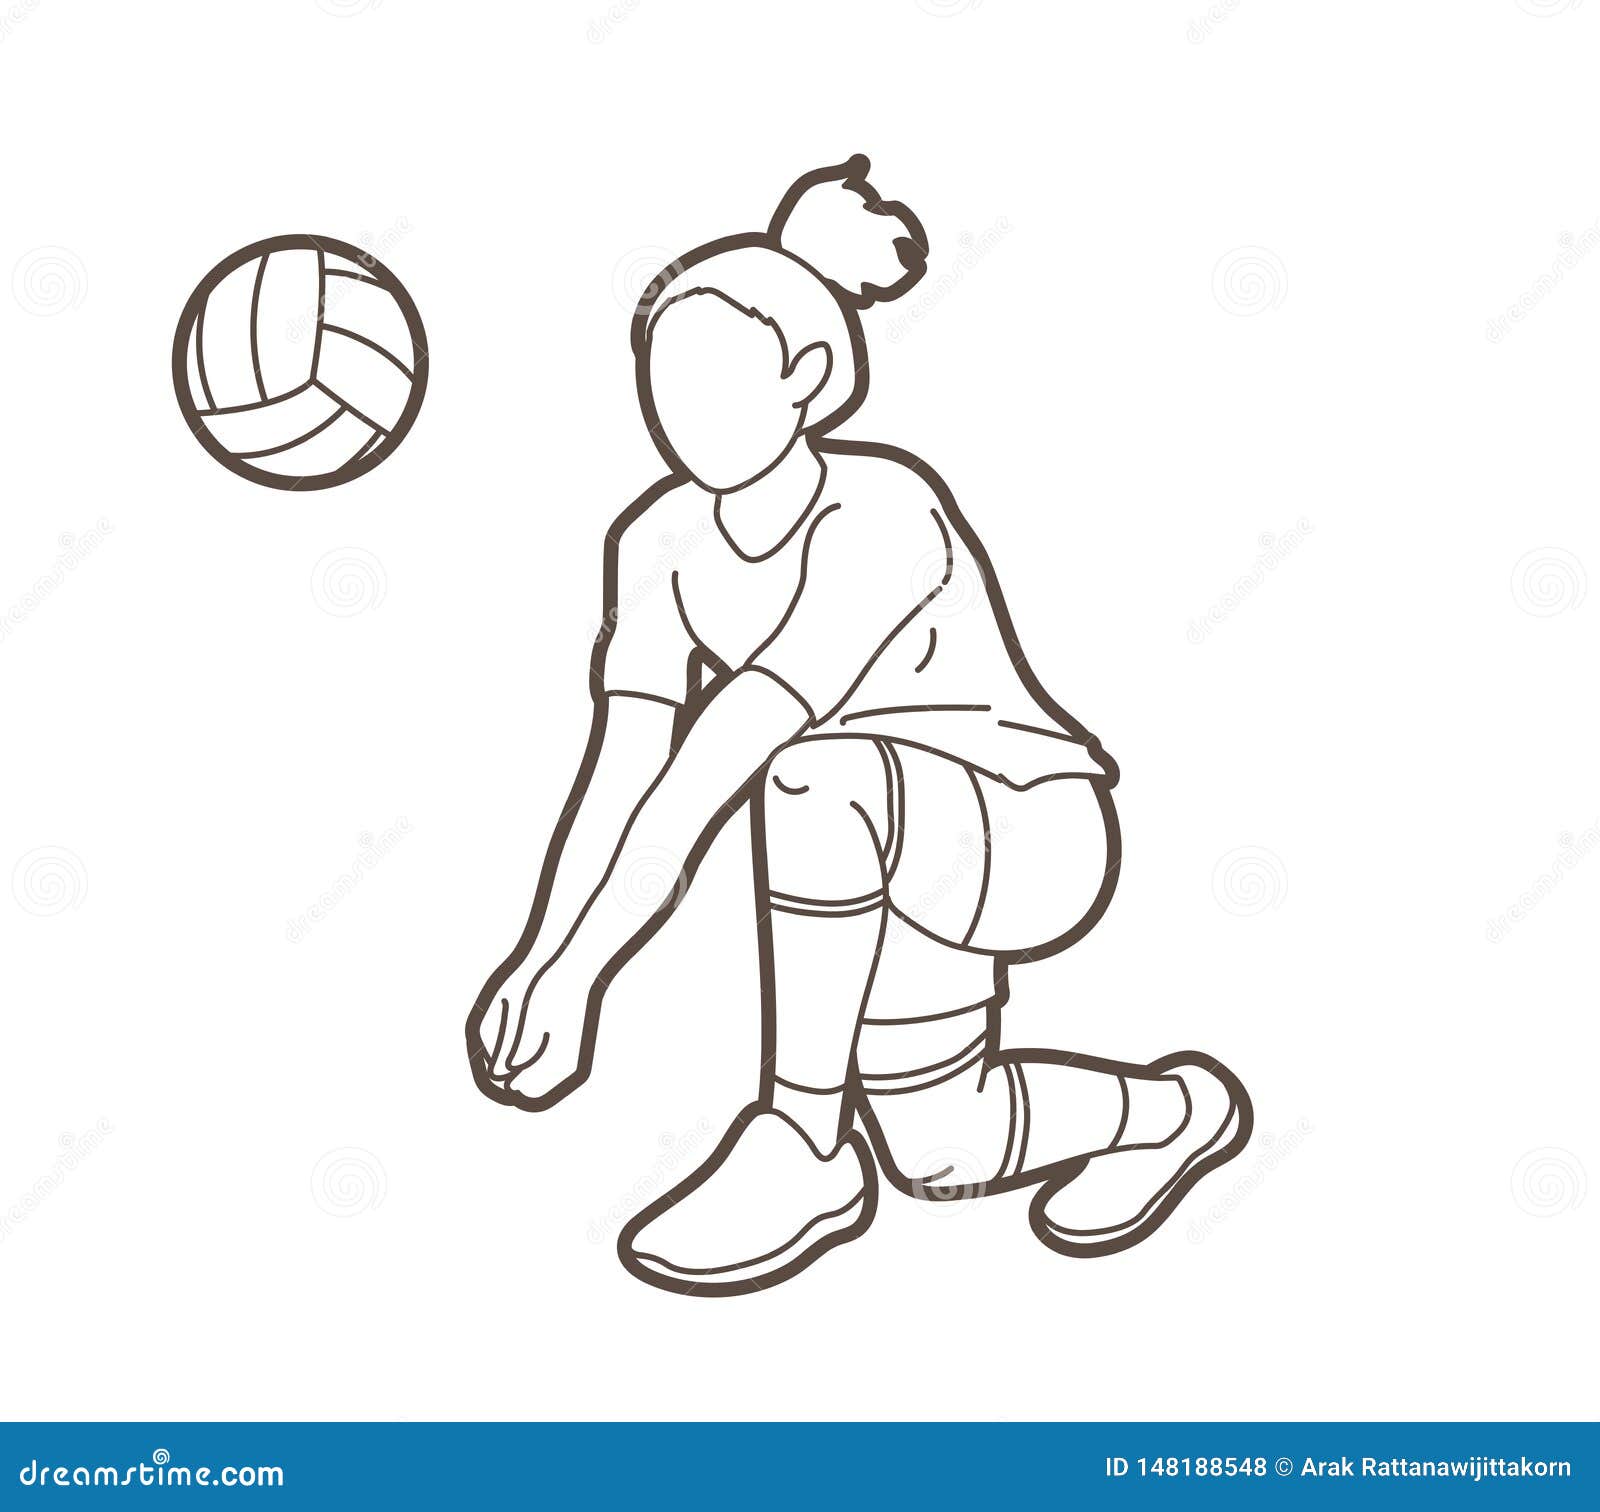 Woman Volleyball Player Action Cartoon Graphic Stock Vector ...